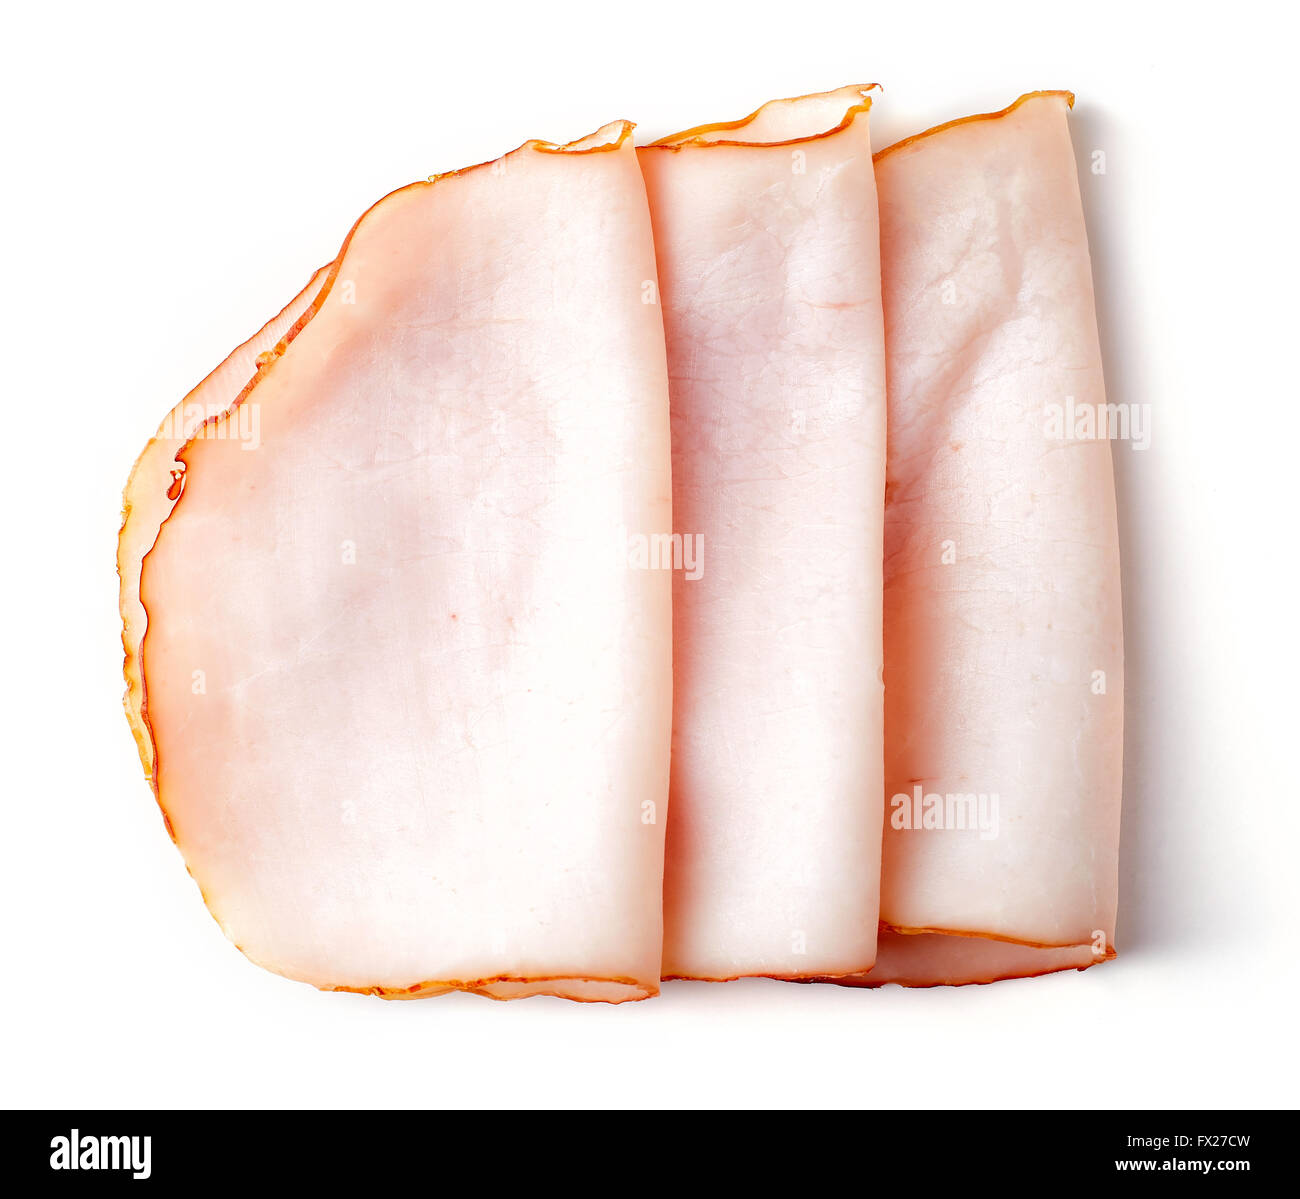 Sliced ham isolated on white background, top view Stock Photo